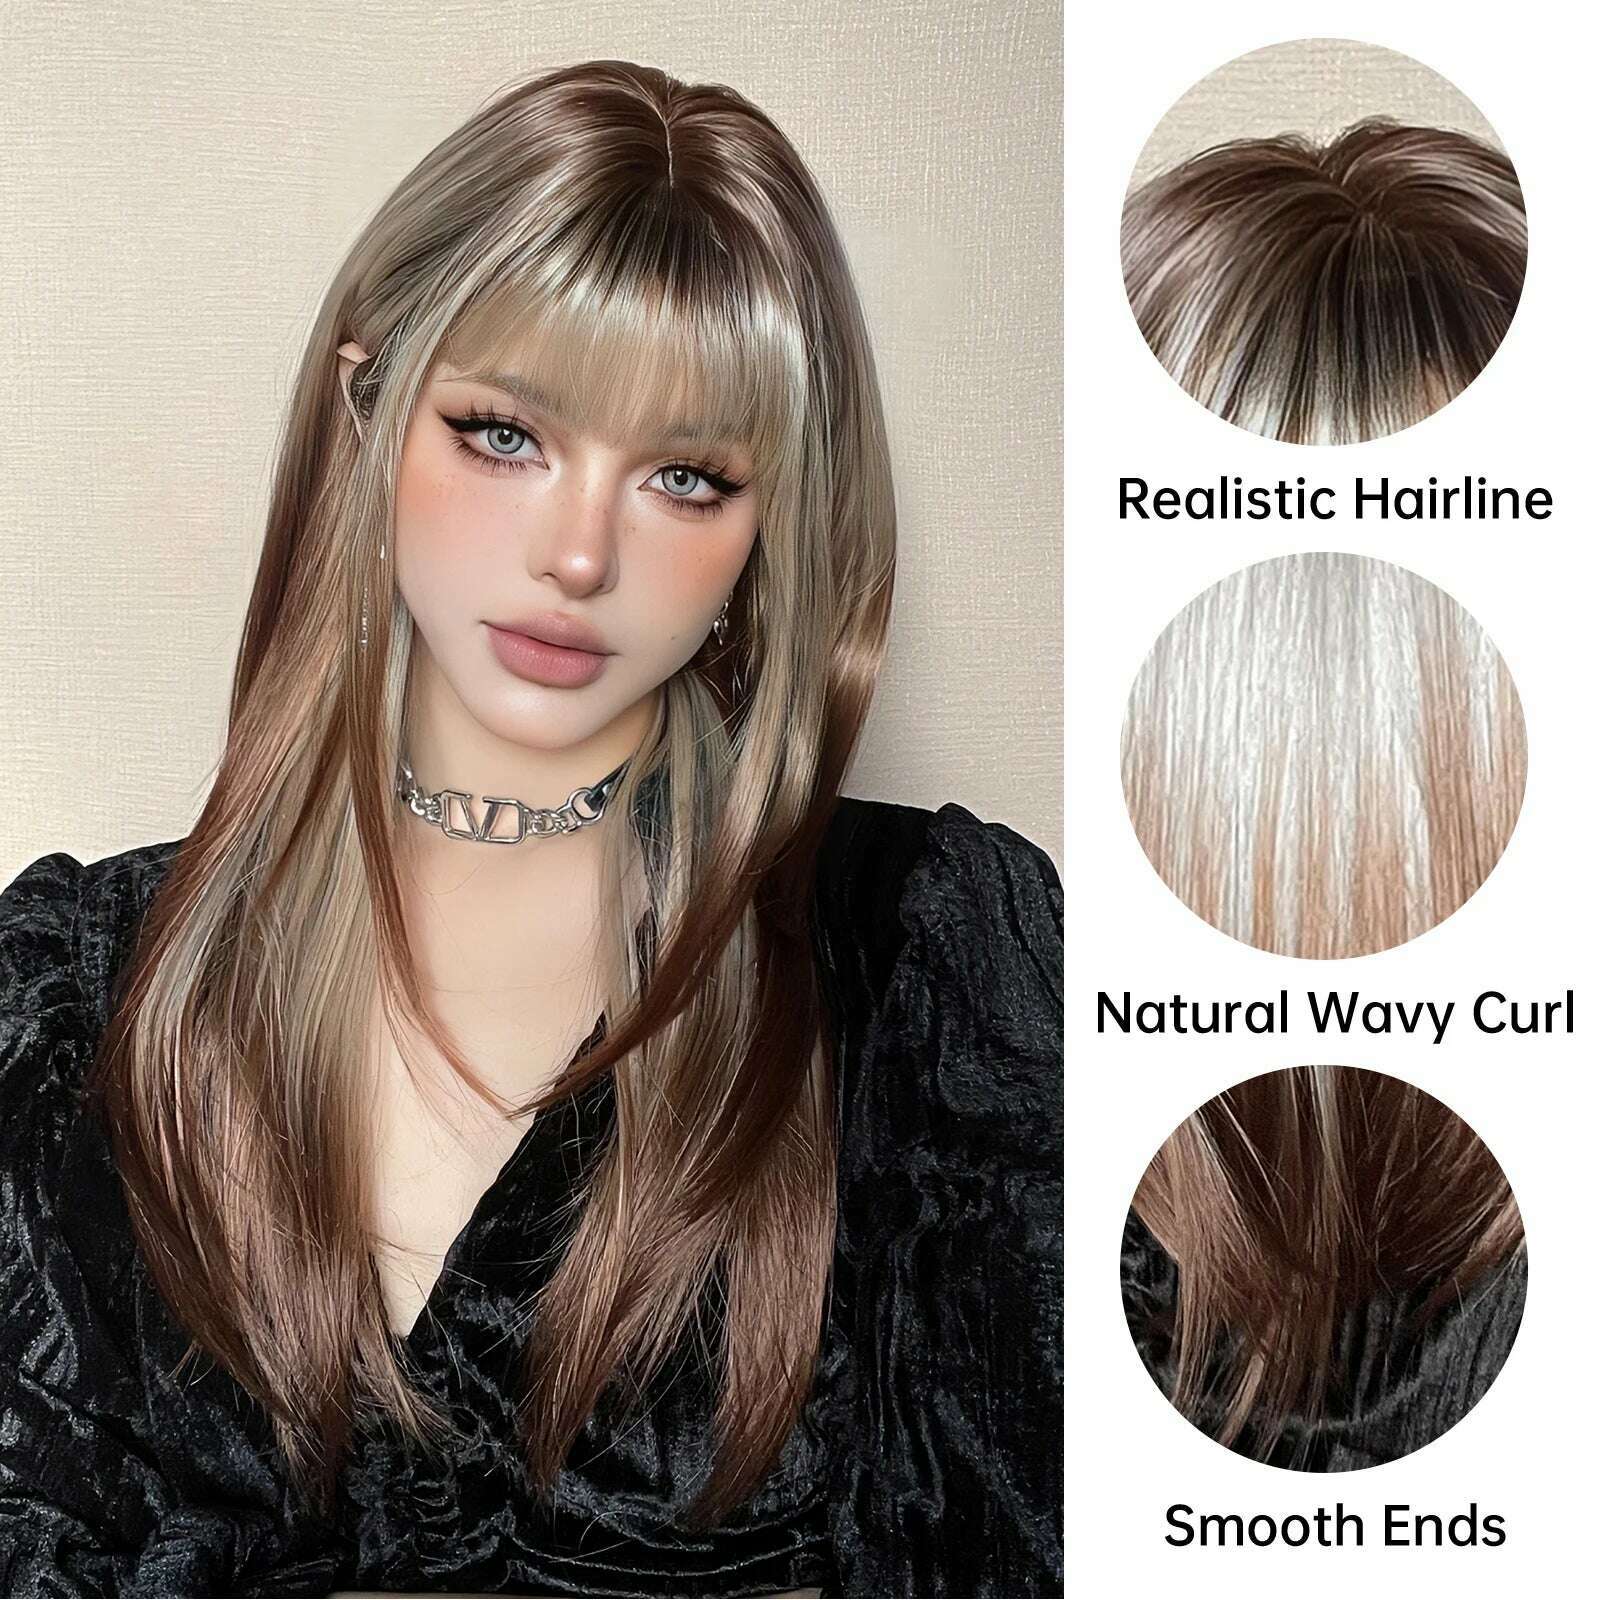 KIMLUD, Straight Layered Long Wigs with Bangs Ombre Brown Silky Synthetic Hair for Women Natural Daily Party Wigs High Temperature Fiber, KIMLUD Womens Clothes